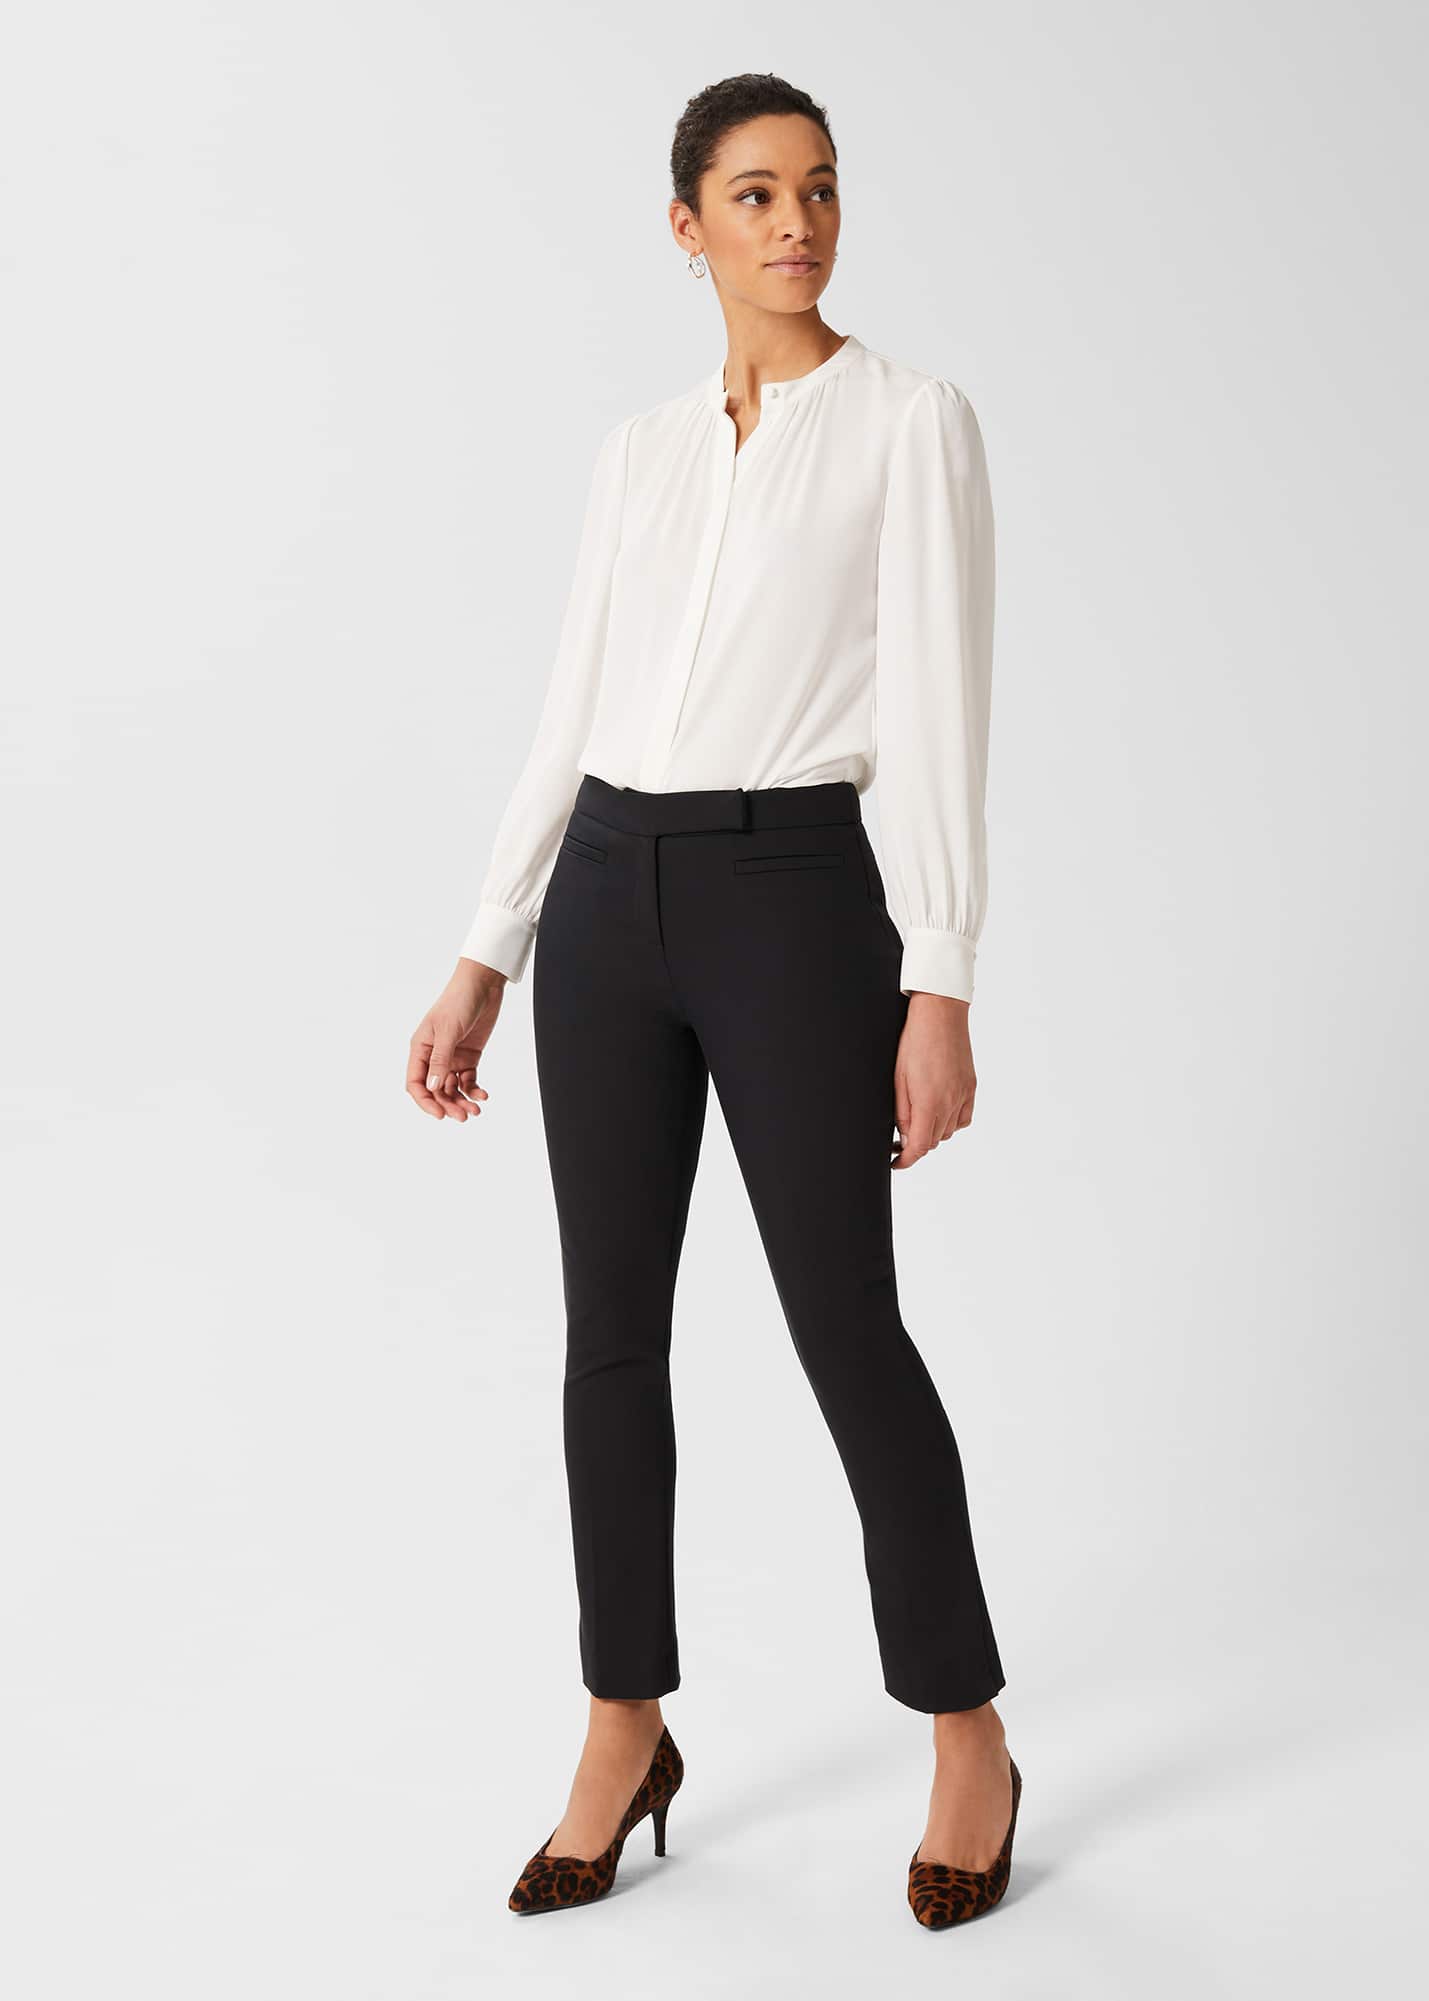 Hobbs Women's Annie Slim Trousers With Stretch - Black